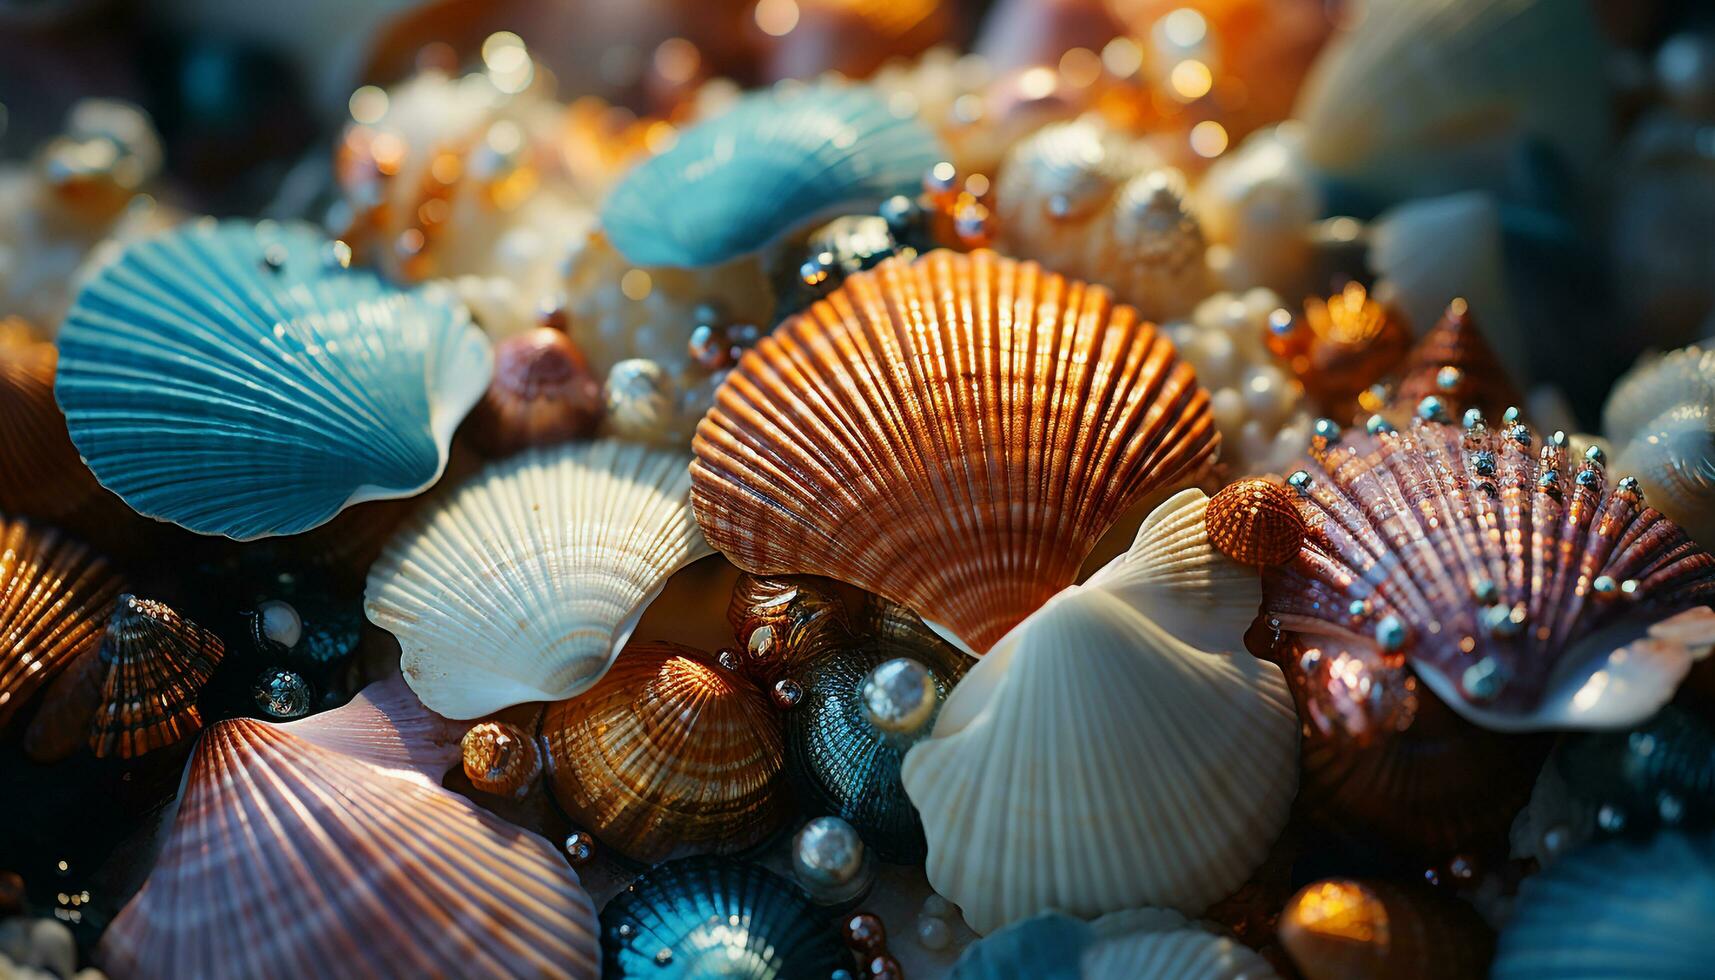 Underwater beauty  nature collection of animal shell patterns and decorations generated by AI photo